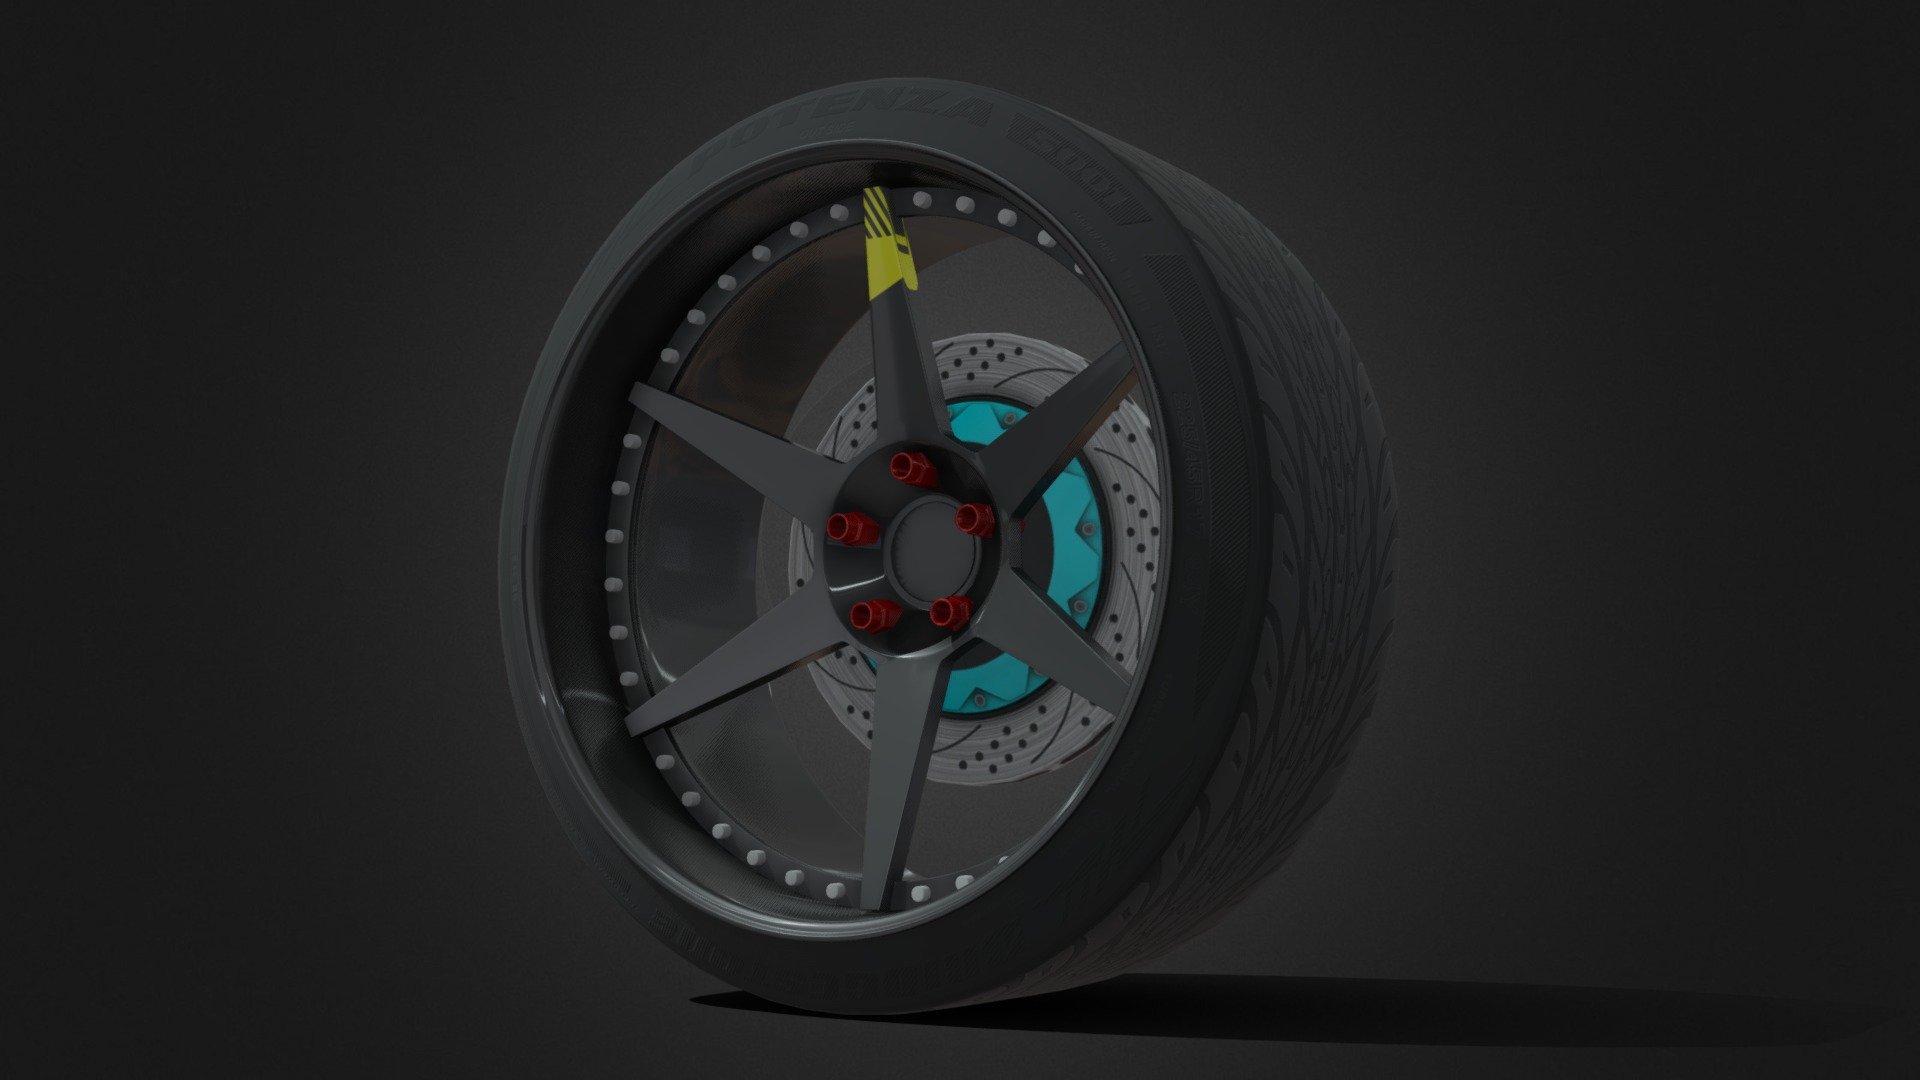 i dunno the exact name of this wheel so i just gonna post it like this

here's the link:
https://www.adro.com/products/toyota-gr86-subaru-brz-widebody-kit - Adro GR86 Wheels - Download Free 3D model by blakebella (@blake2theback) 3d model